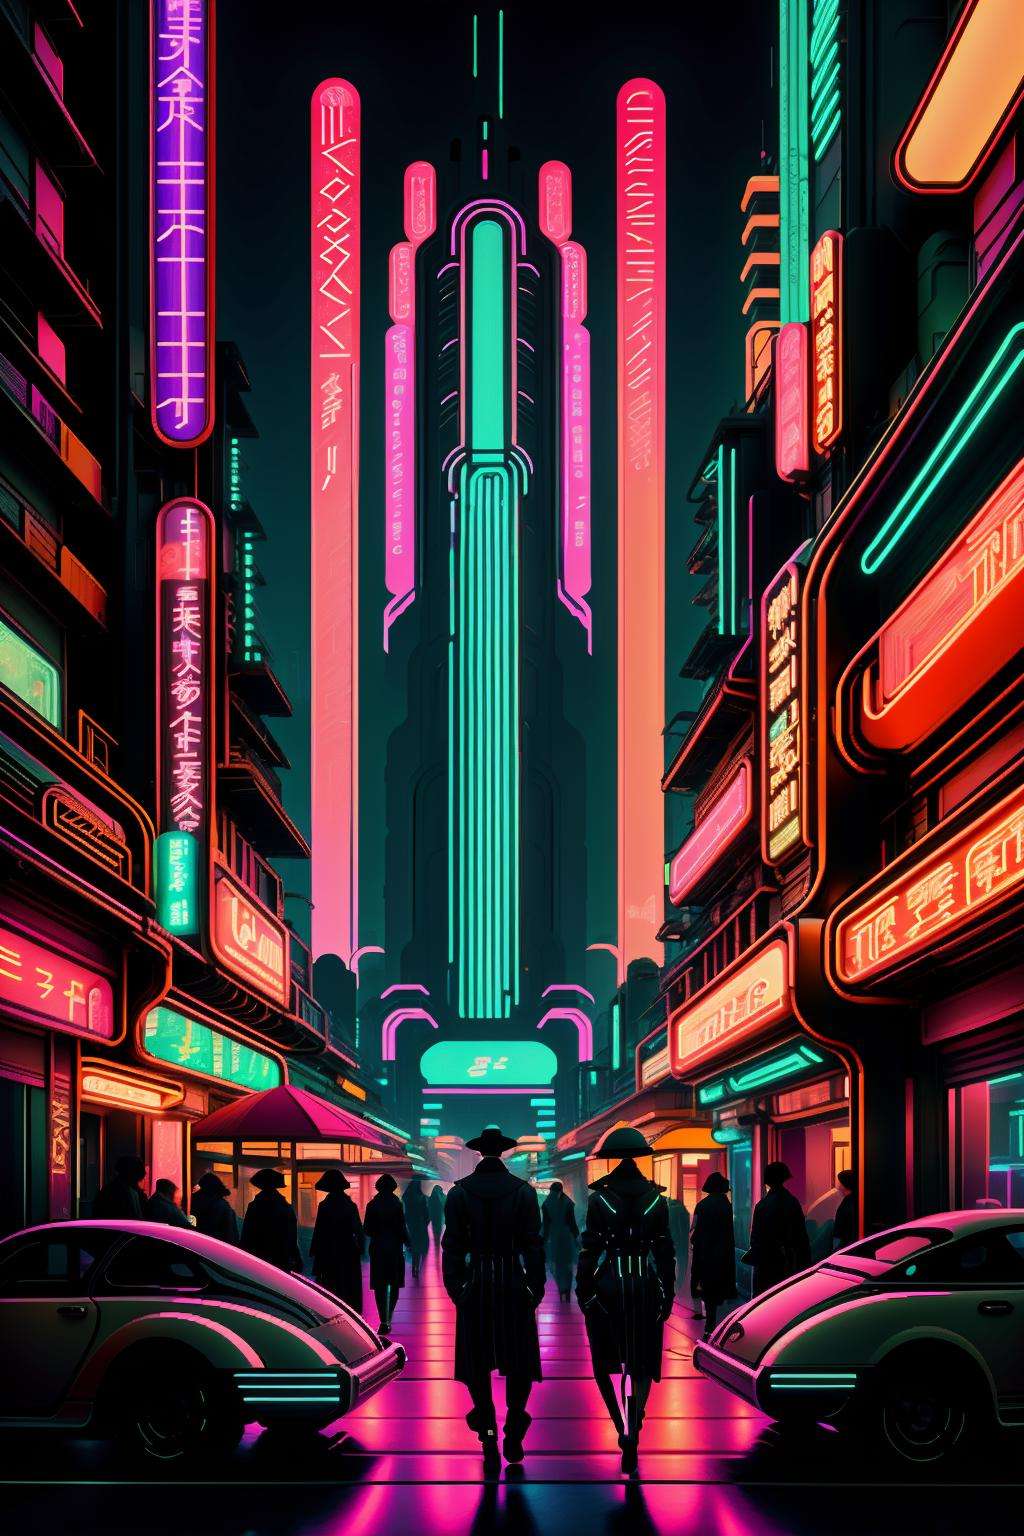 a futuristic city with people walking around and a car parked in the street at night time, with neon lights, Beeple, synthwave style, cyberpunk art, retrofuturism , neon_nouveau